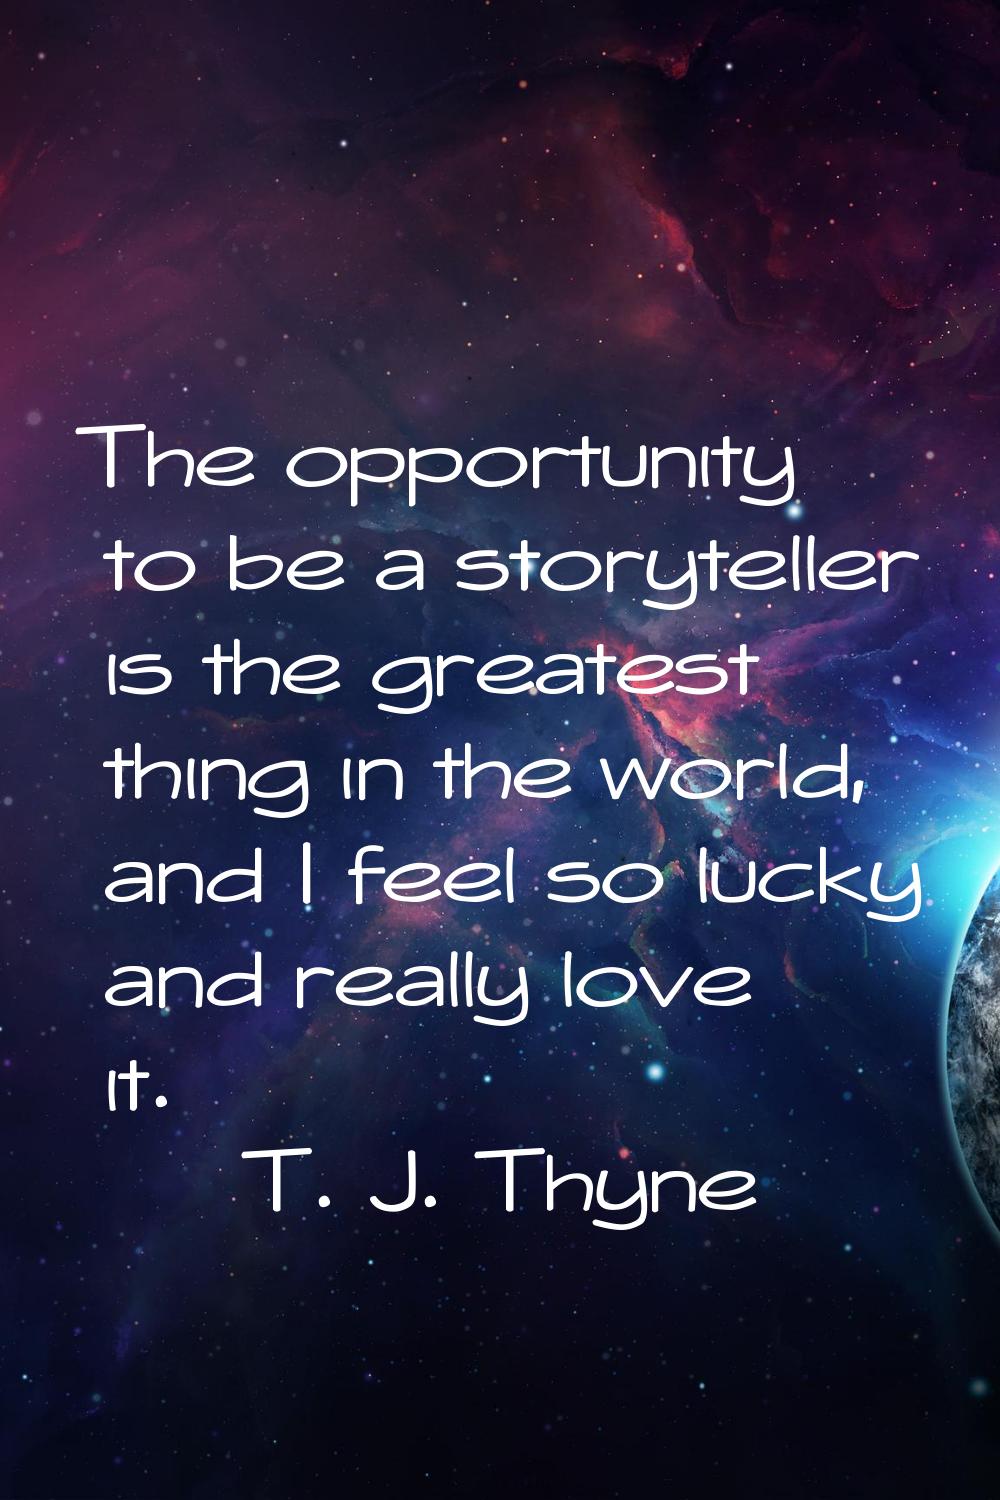 The opportunity to be a storyteller is the greatest thing in the world, and I feel so lucky and rea